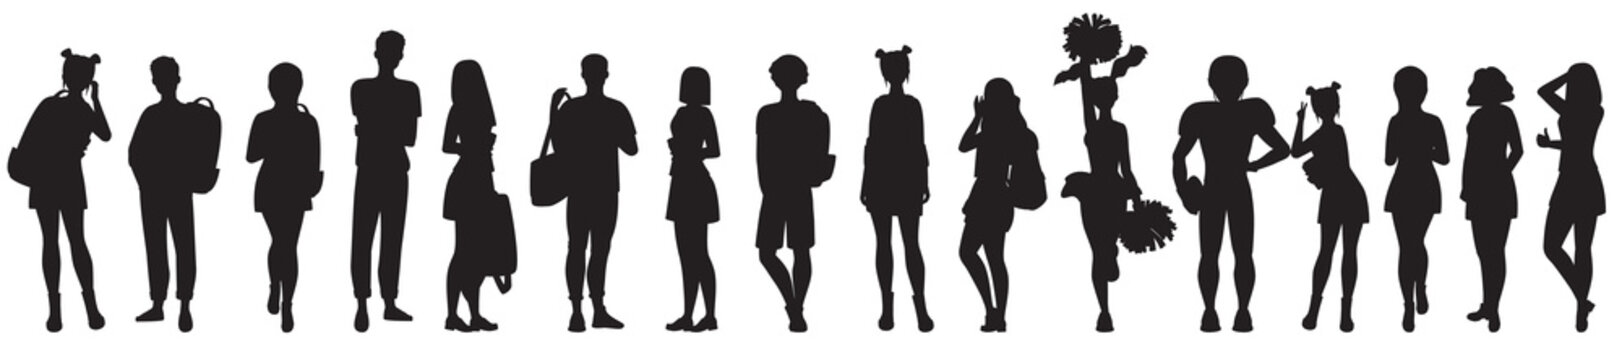 PrintA silhouette of teenage girls and boys with books and backpacks. Black and white vector illustration 